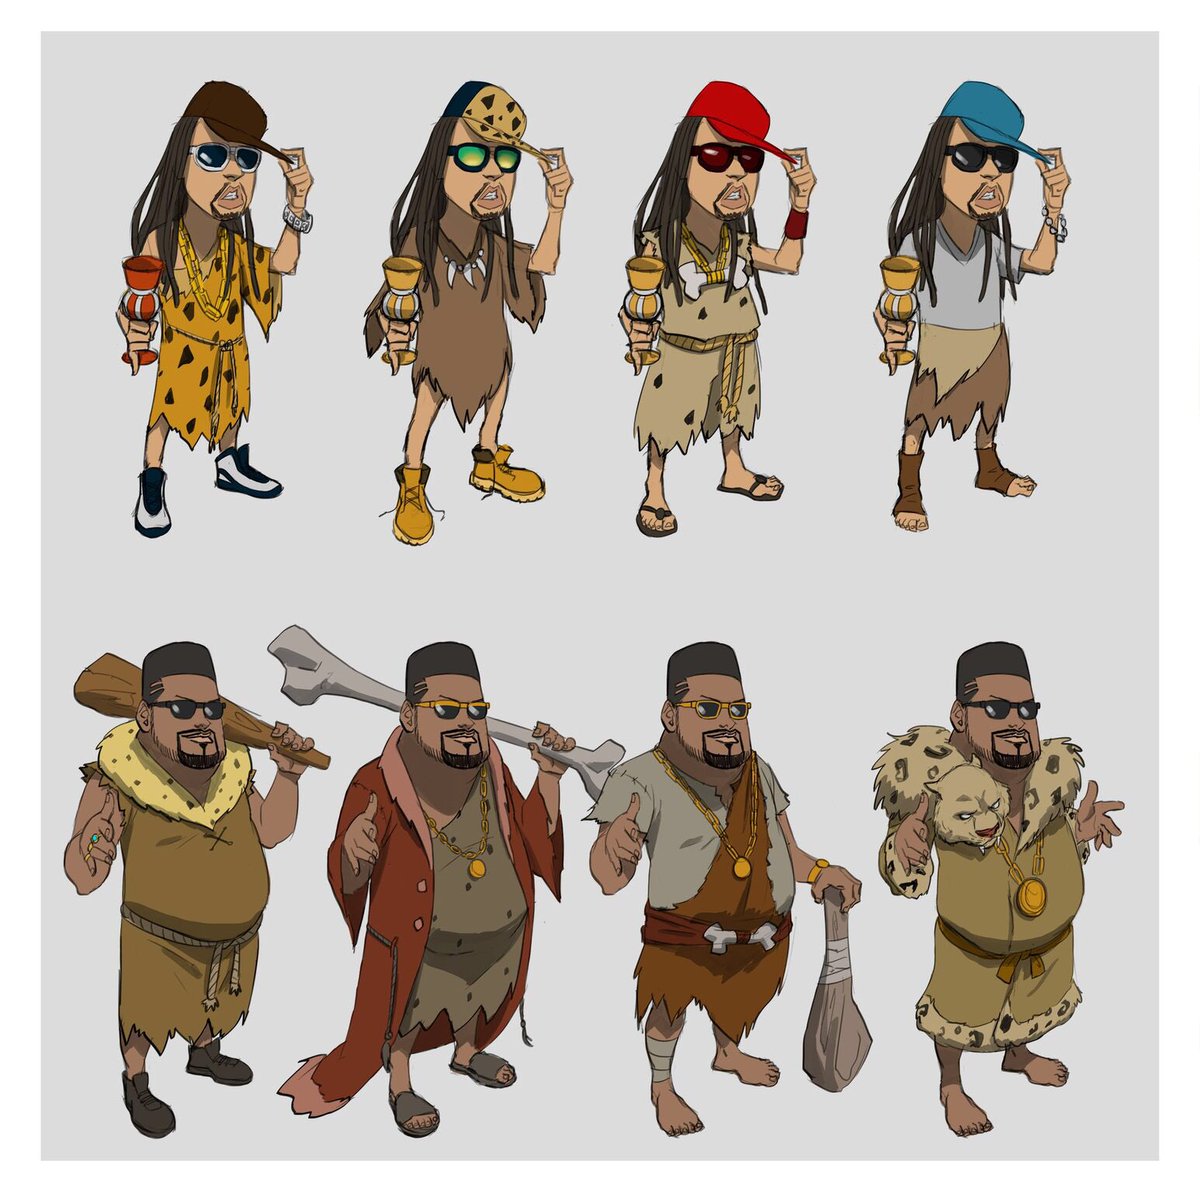 RT @BigAliNYC: If @LilJon and I were #flintstones this is what we'd look like #LikeABoss https://t.co/m9H3x2s34F